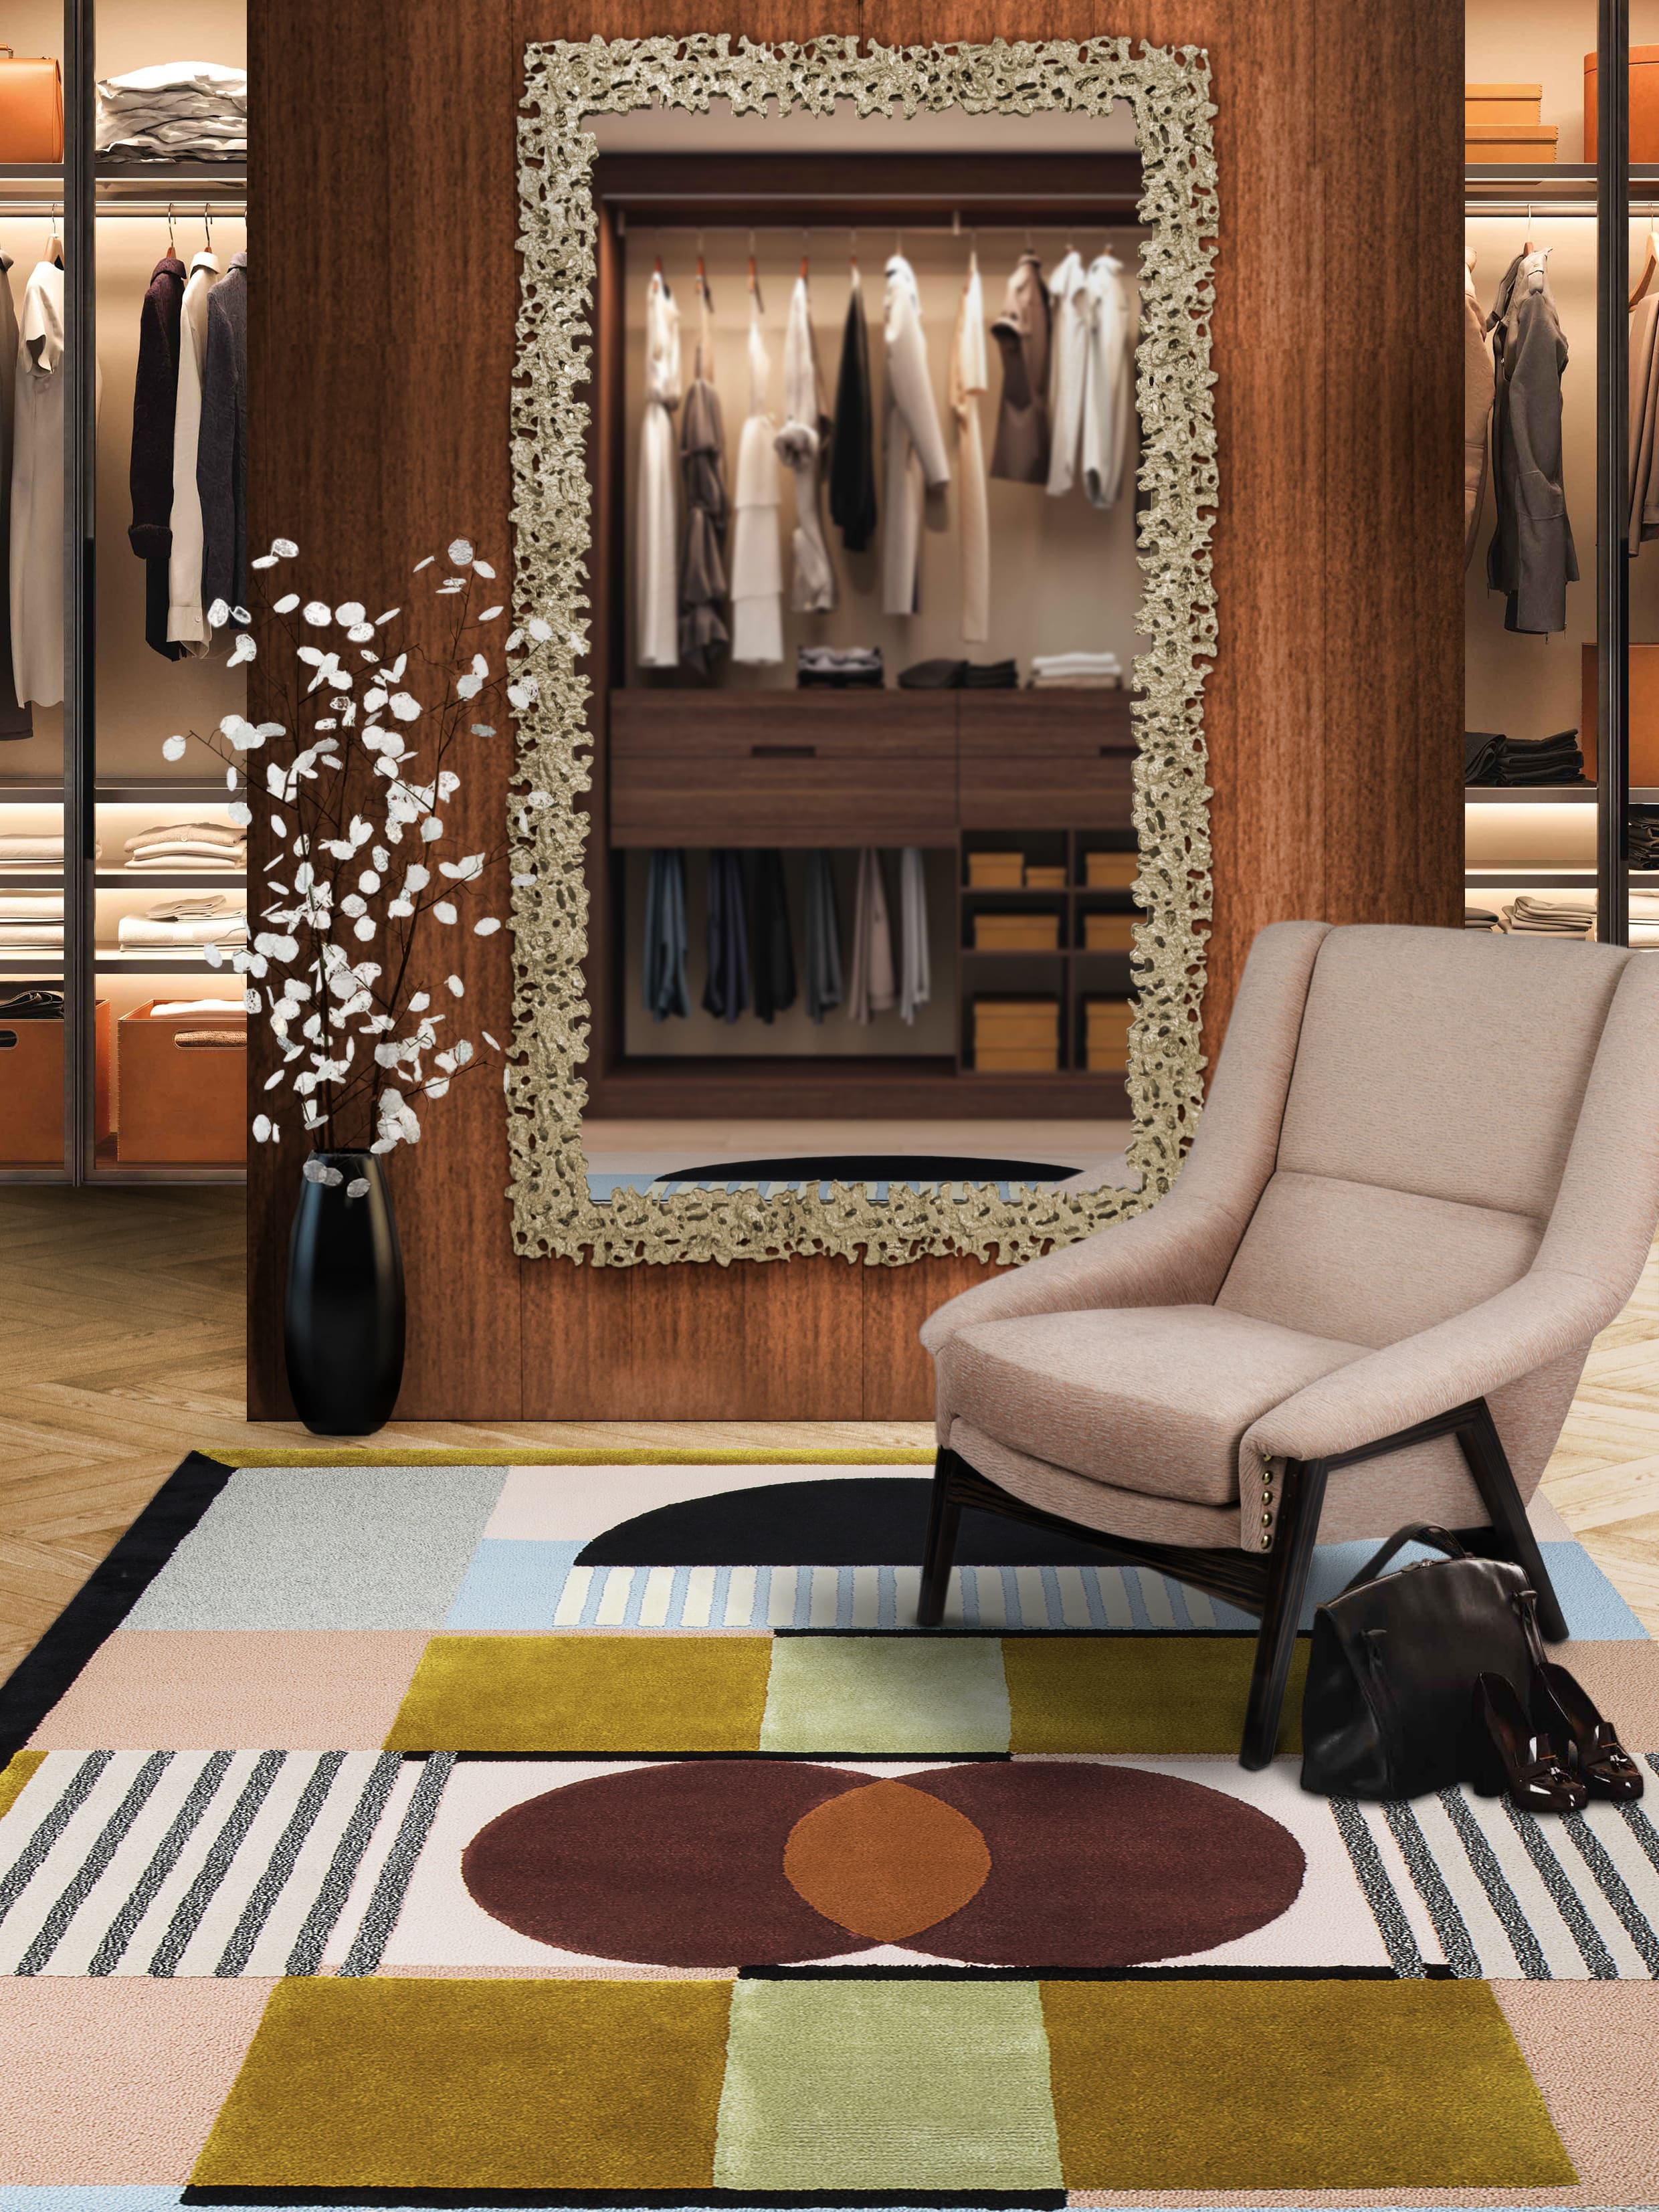 Sophisticated And Alluring, This Wardrobe Closet Design Was Created To Shine - Home'Society